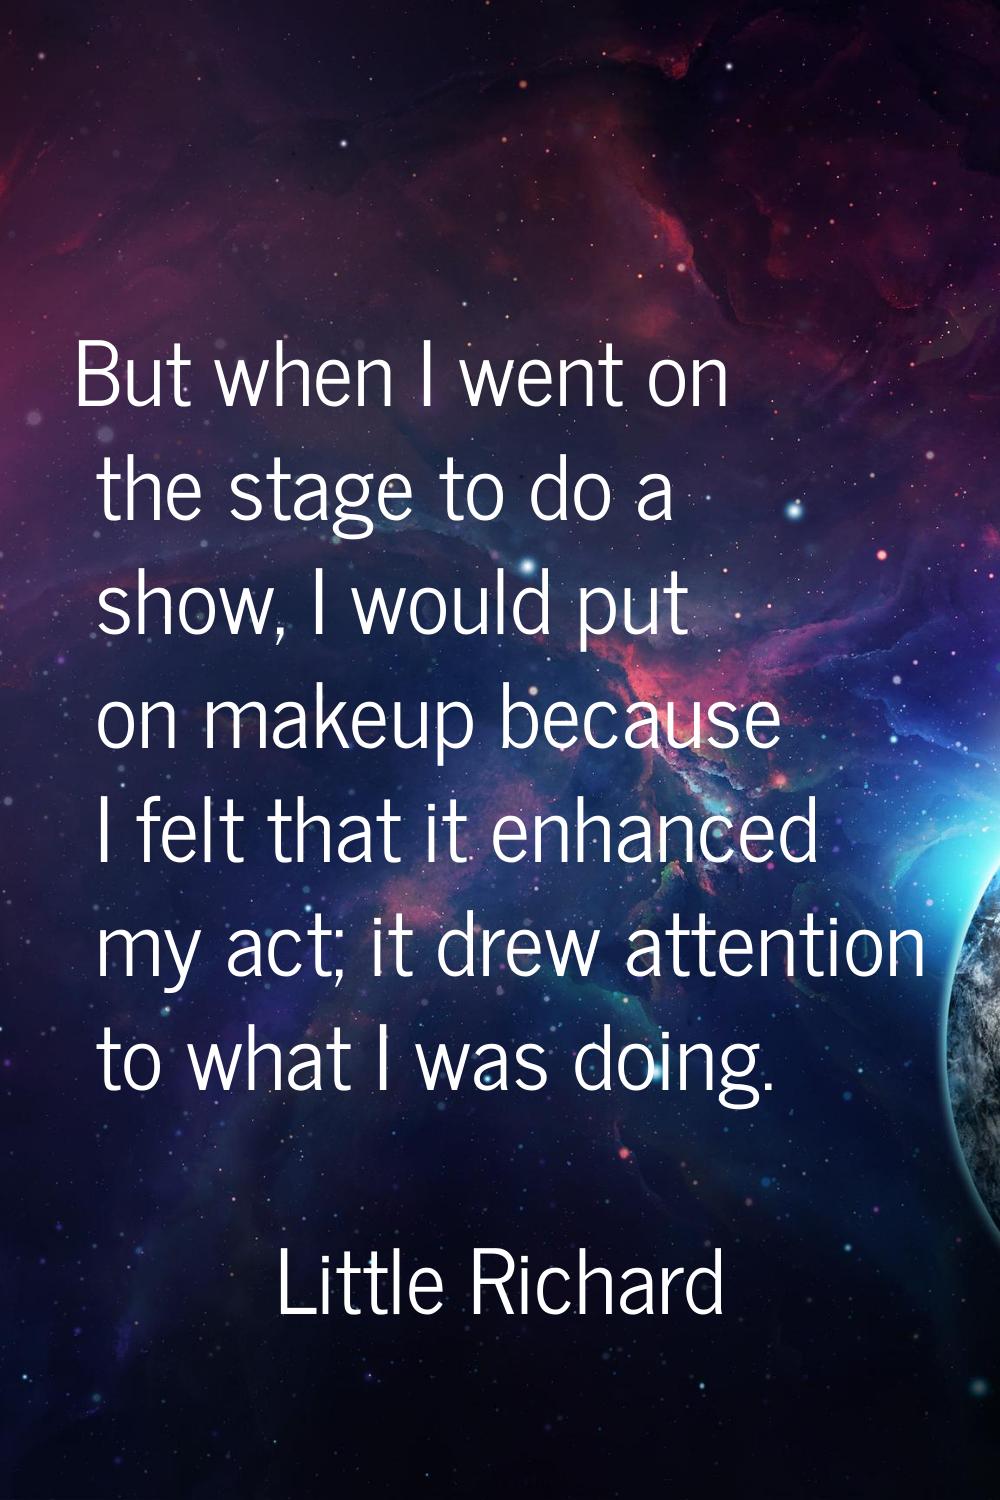 But when I went on the stage to do a show, I would put on makeup because I felt that it enhanced my